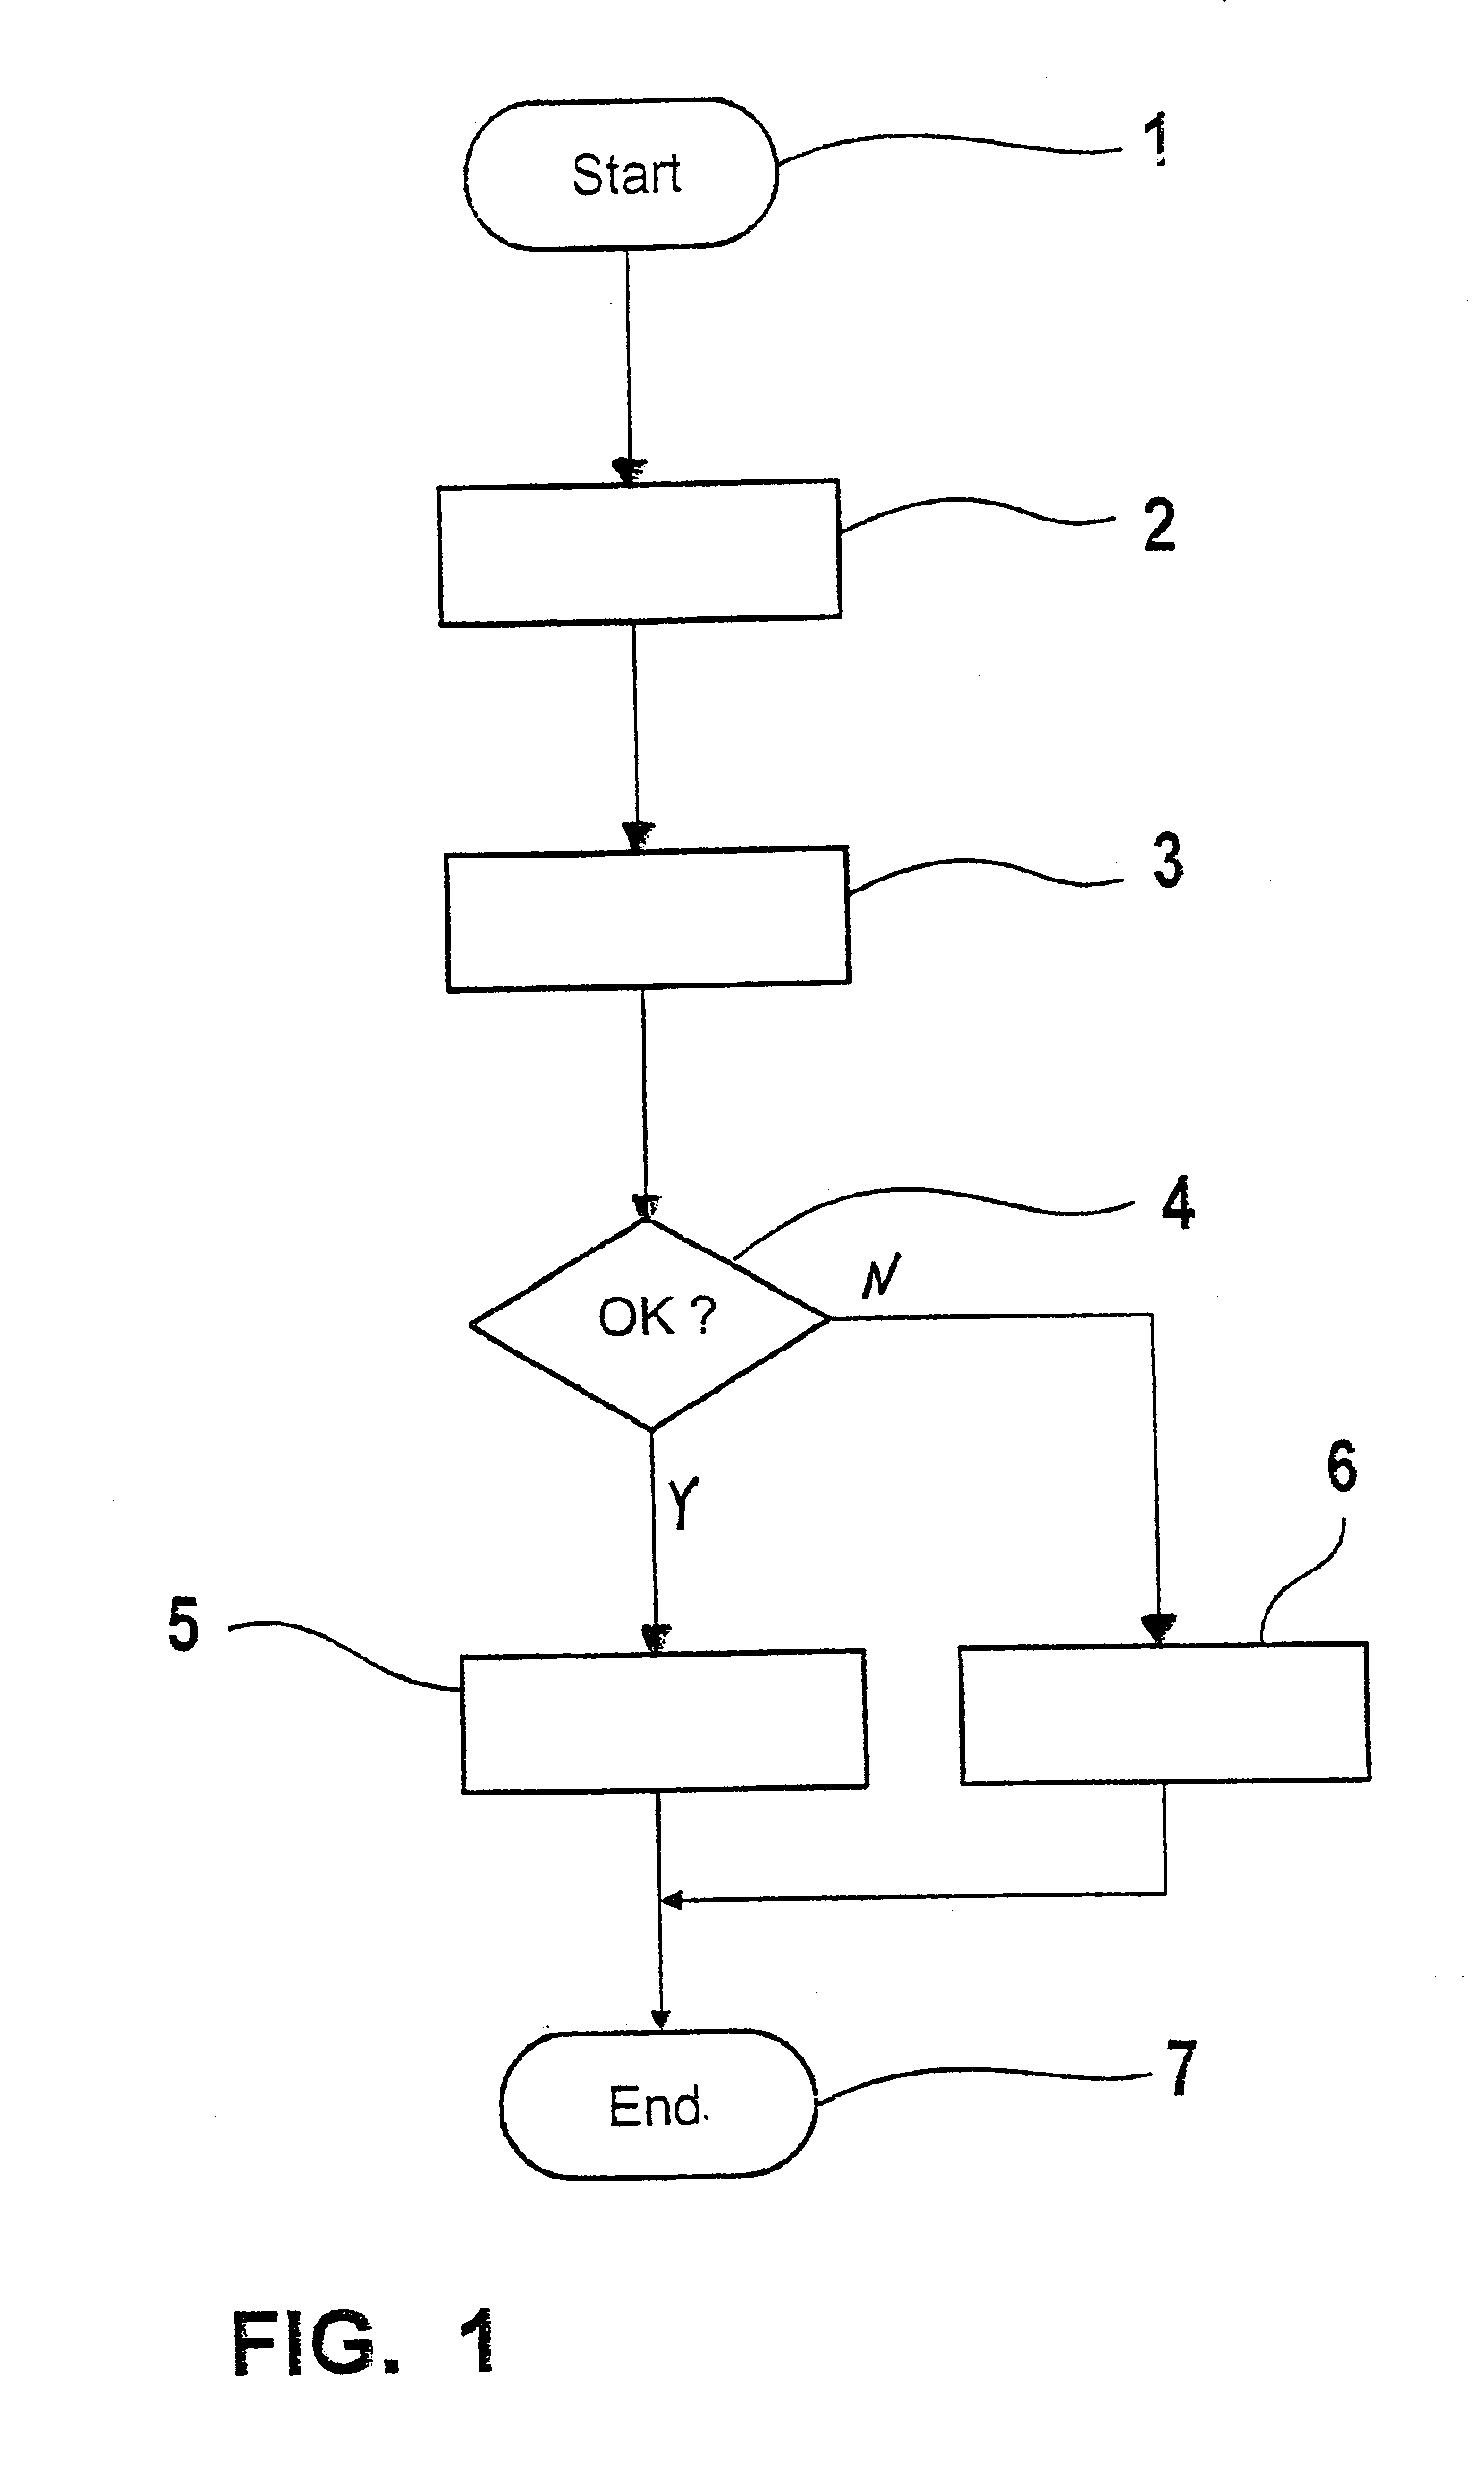 Method for activating or deactivating data stored in a memory arrangement of a microcomputer system